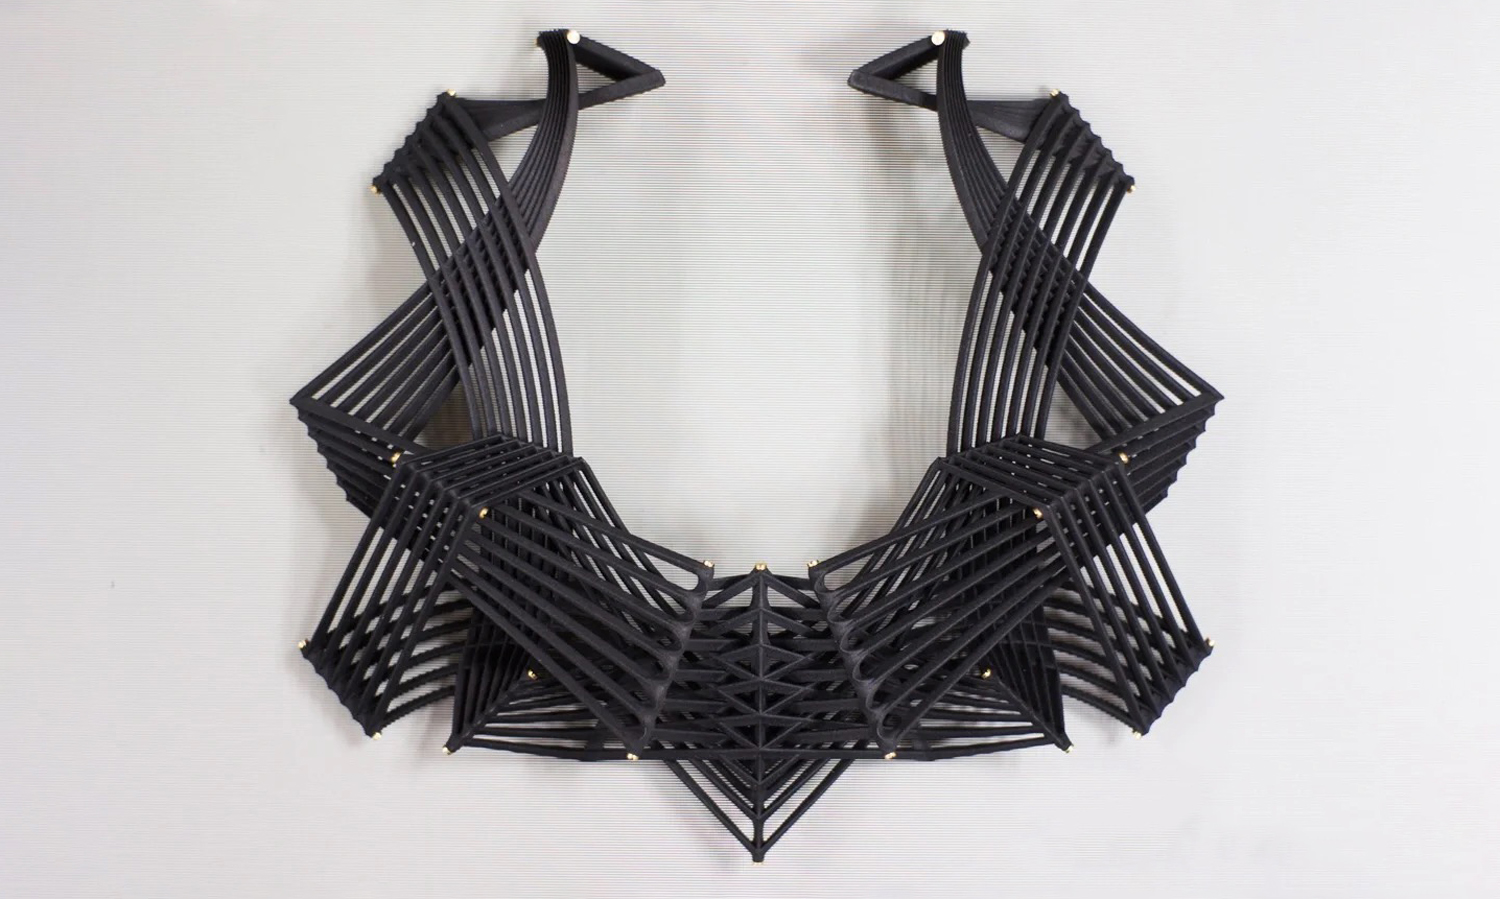 3D Printed Necklace: 15 Great Models to 3D Print | All3DP